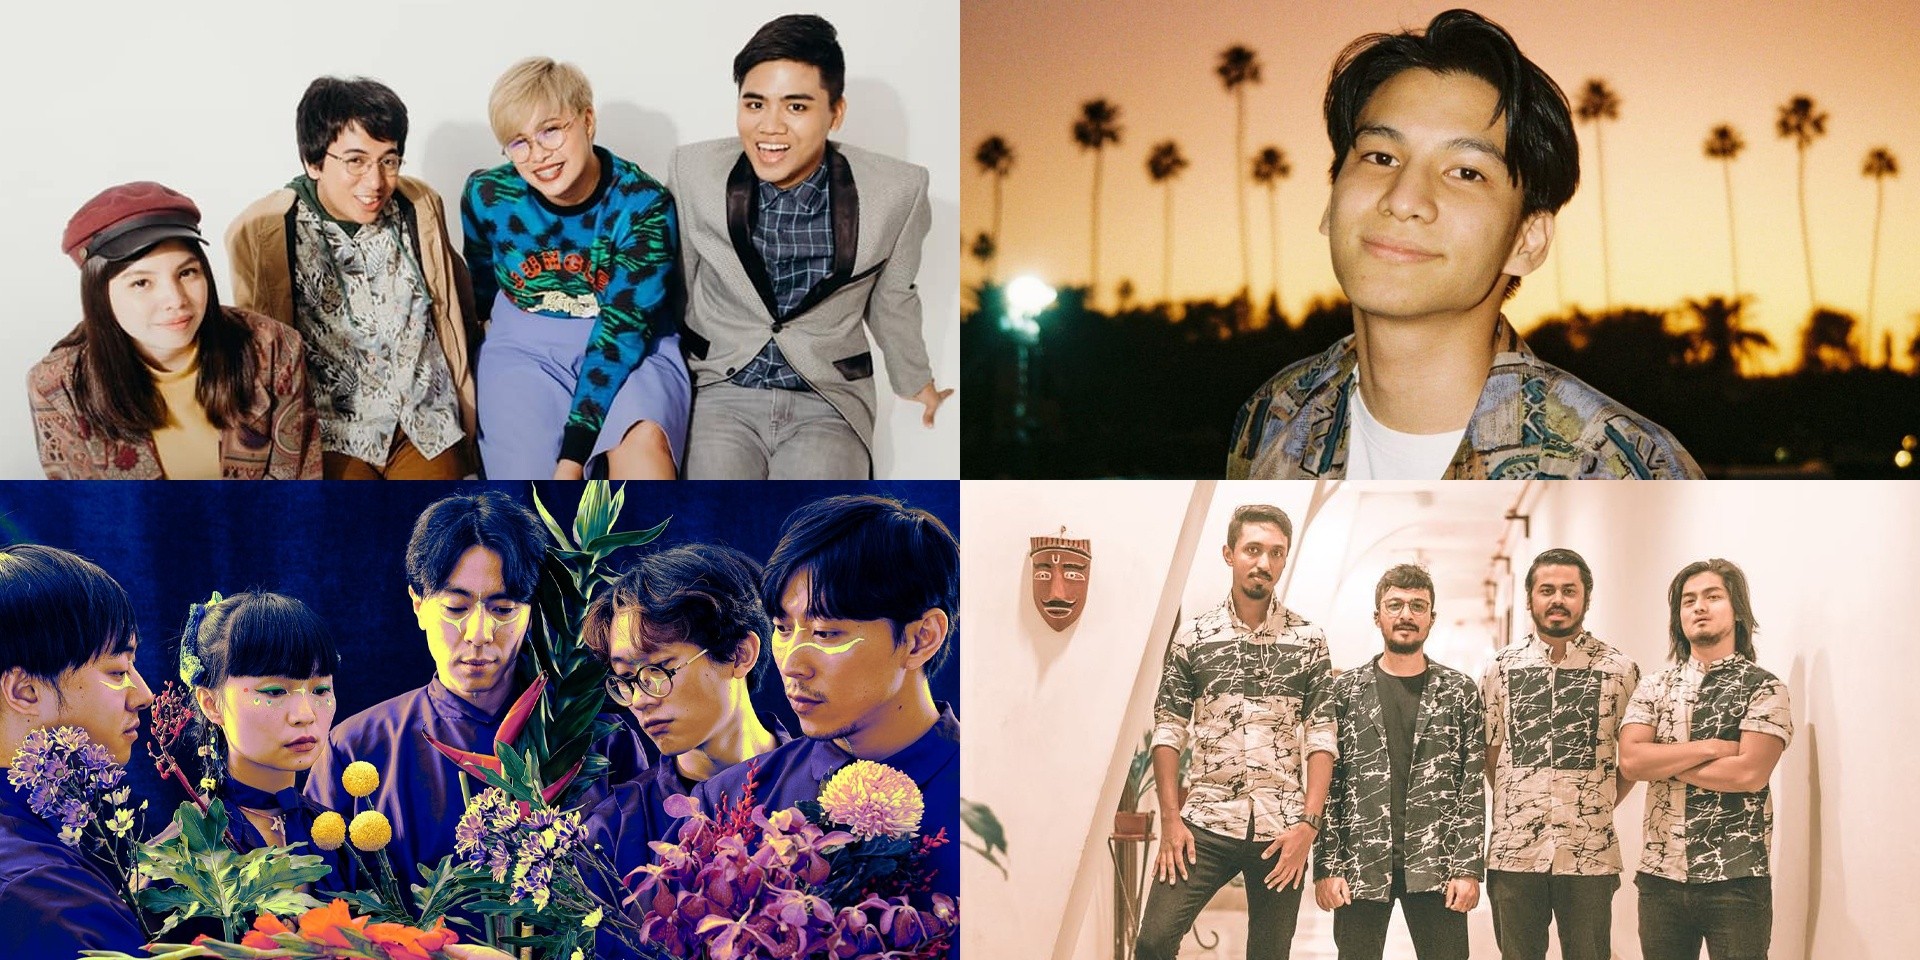 Here are 10 Audiotree Live performances featuring Asian acts you shouldn't miss